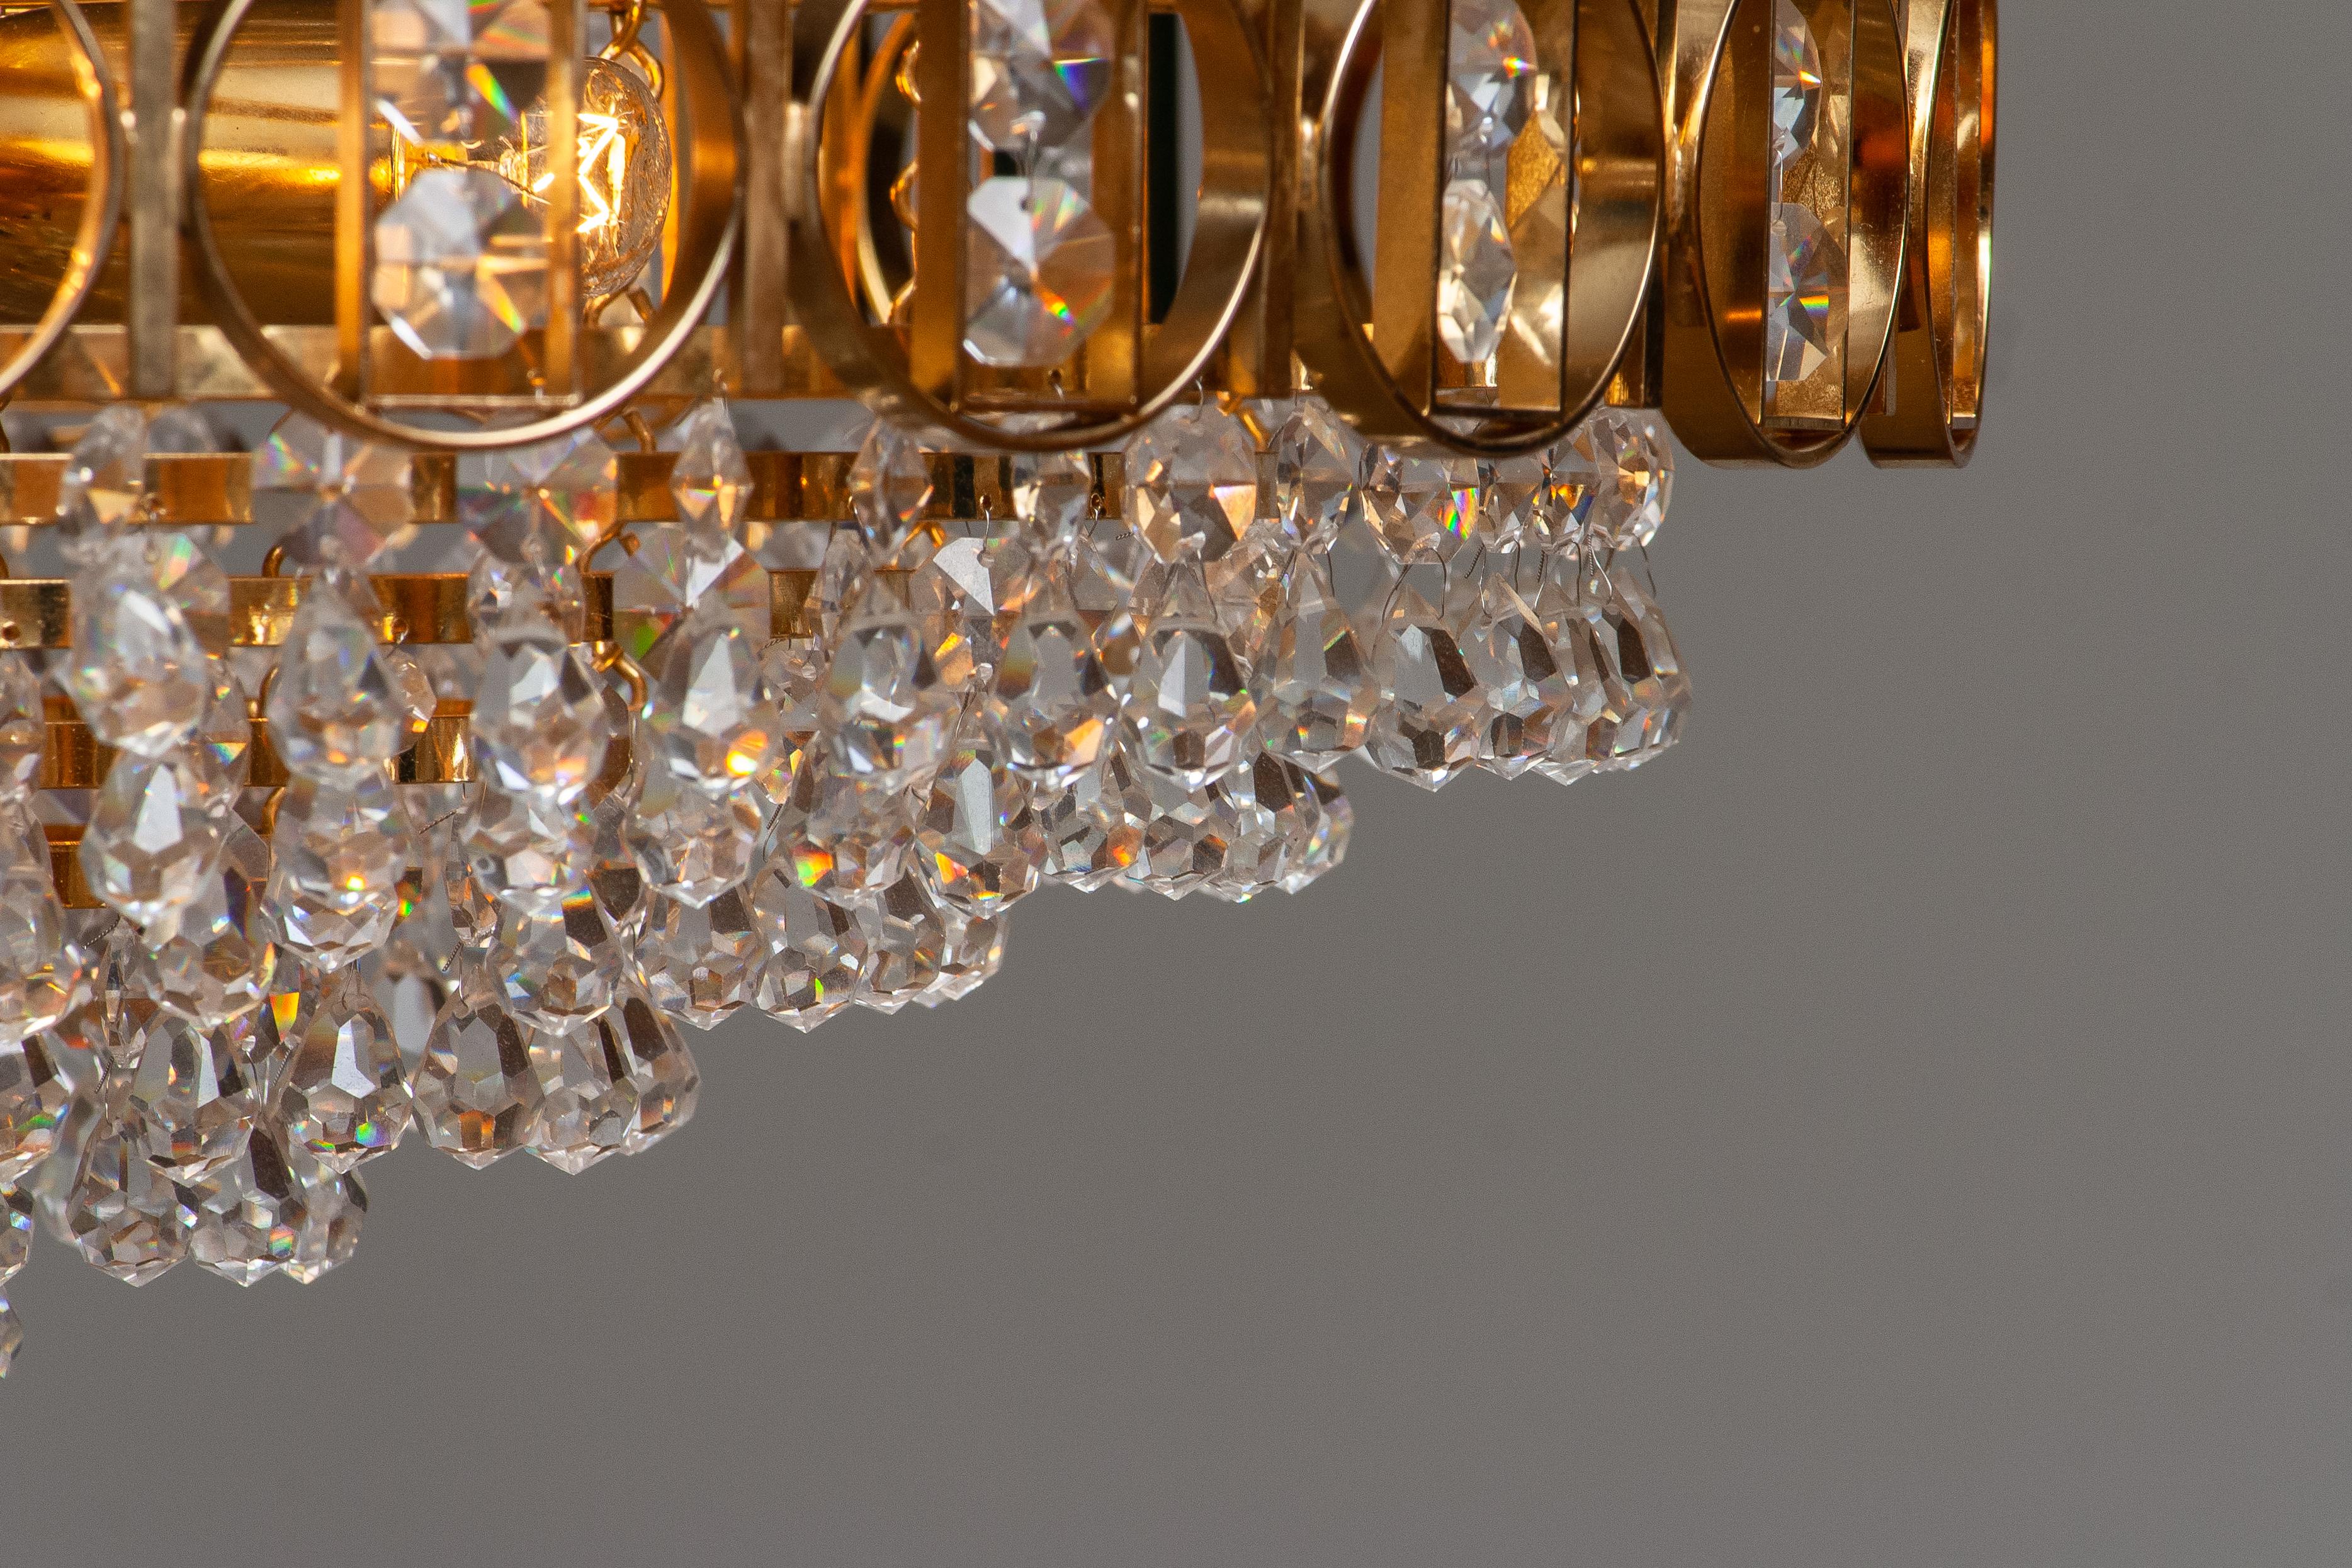 1970s, Gold-Plated Brass Chandelier with Faceted Crystals Made by Palwa, Germany In Good Condition For Sale In Silvolde, Gelderland